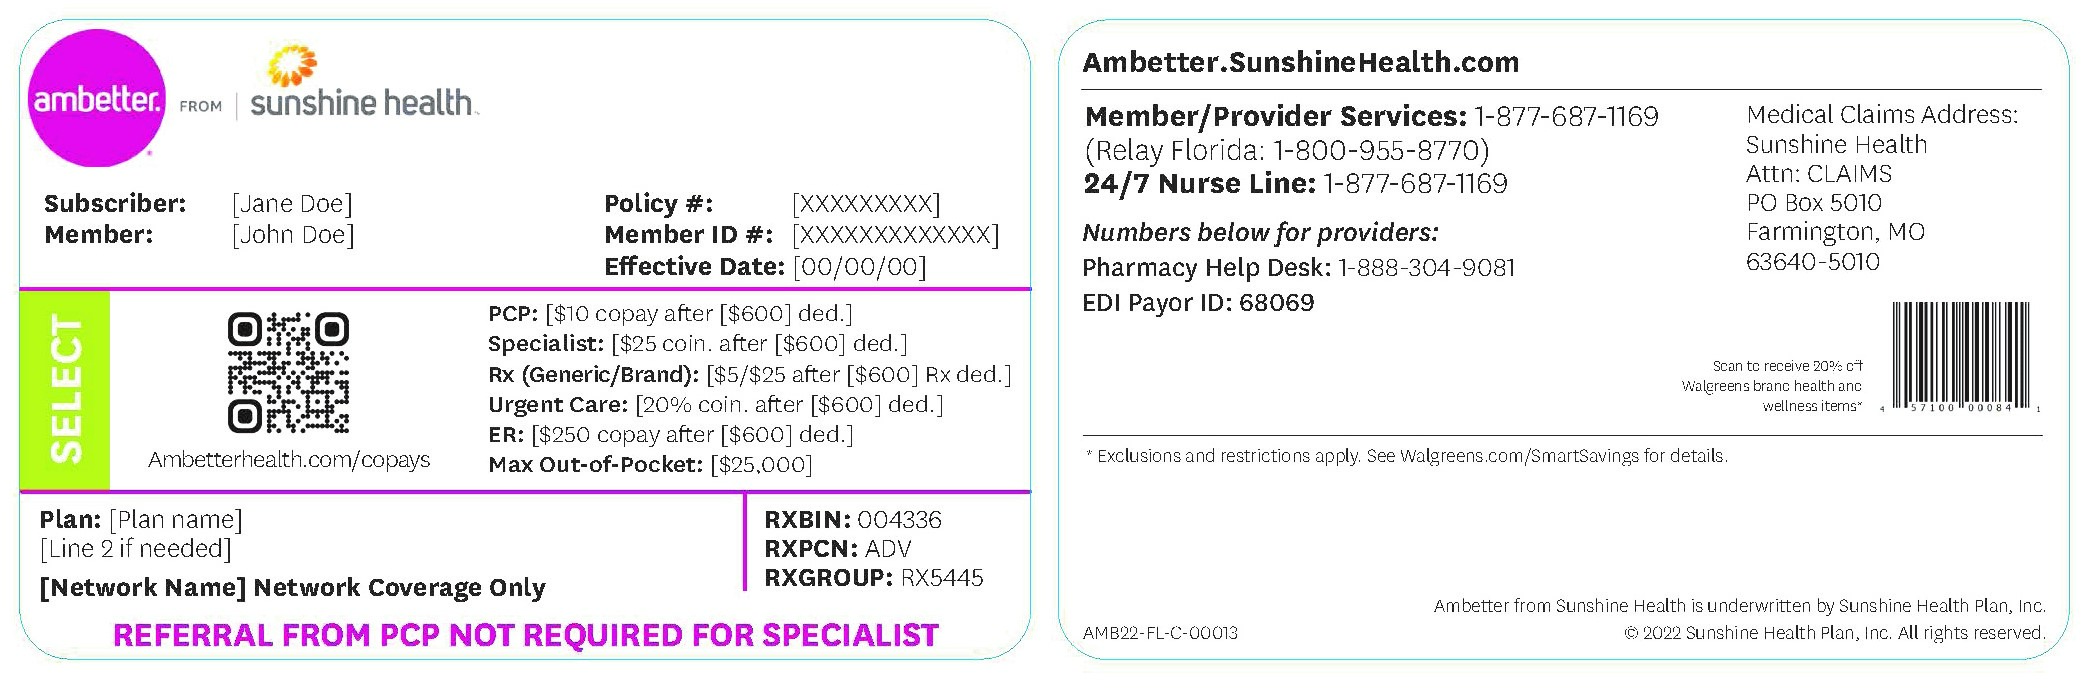 provider-resources-manuals-forms-ambetter-from-sunshine-health